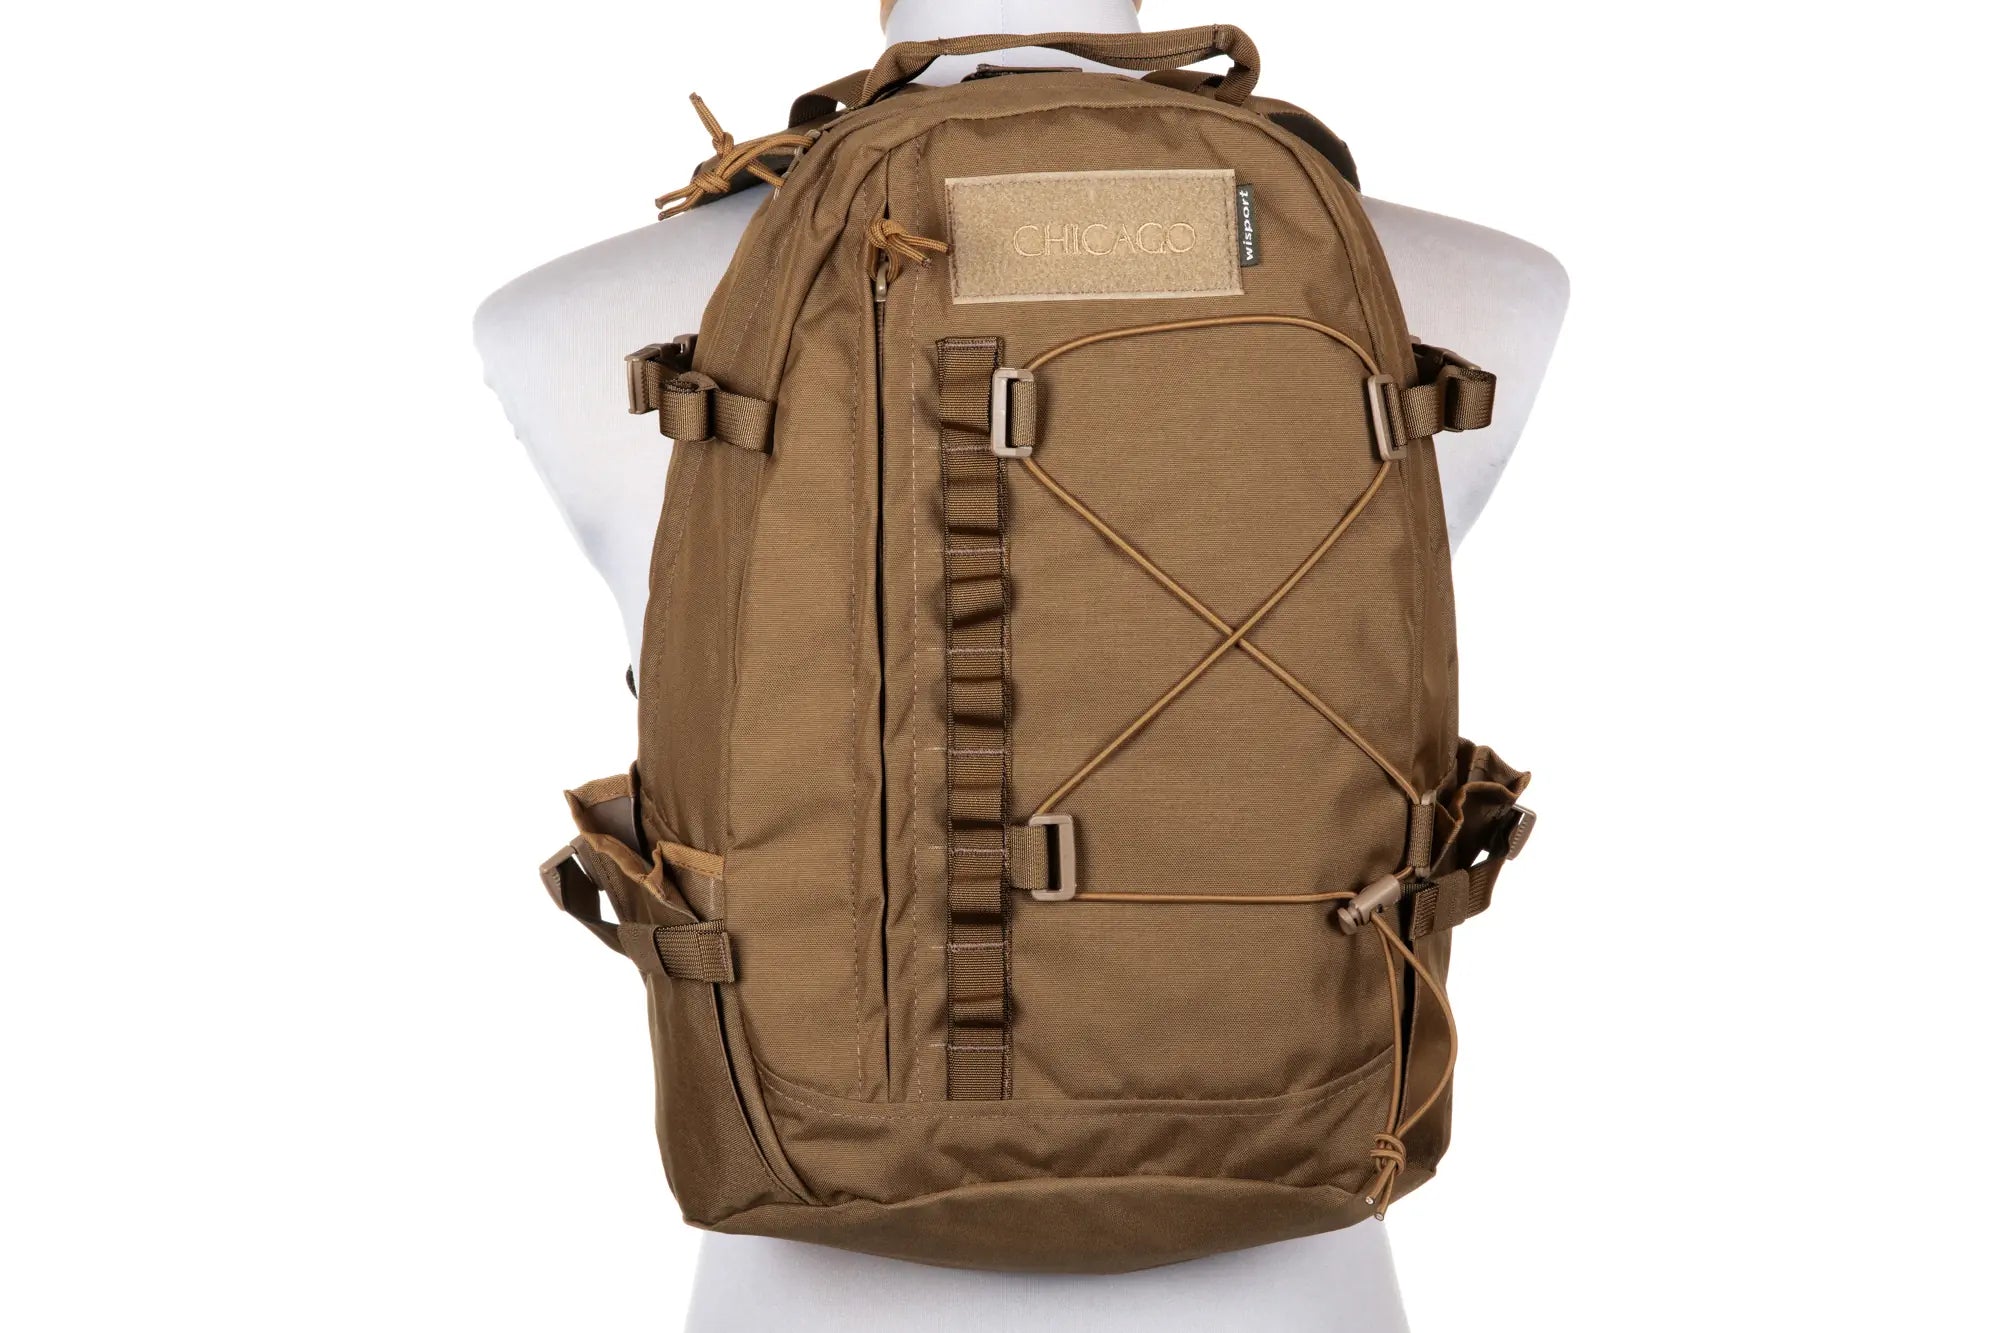 Chicago backpack 25L Coyote Brown-1